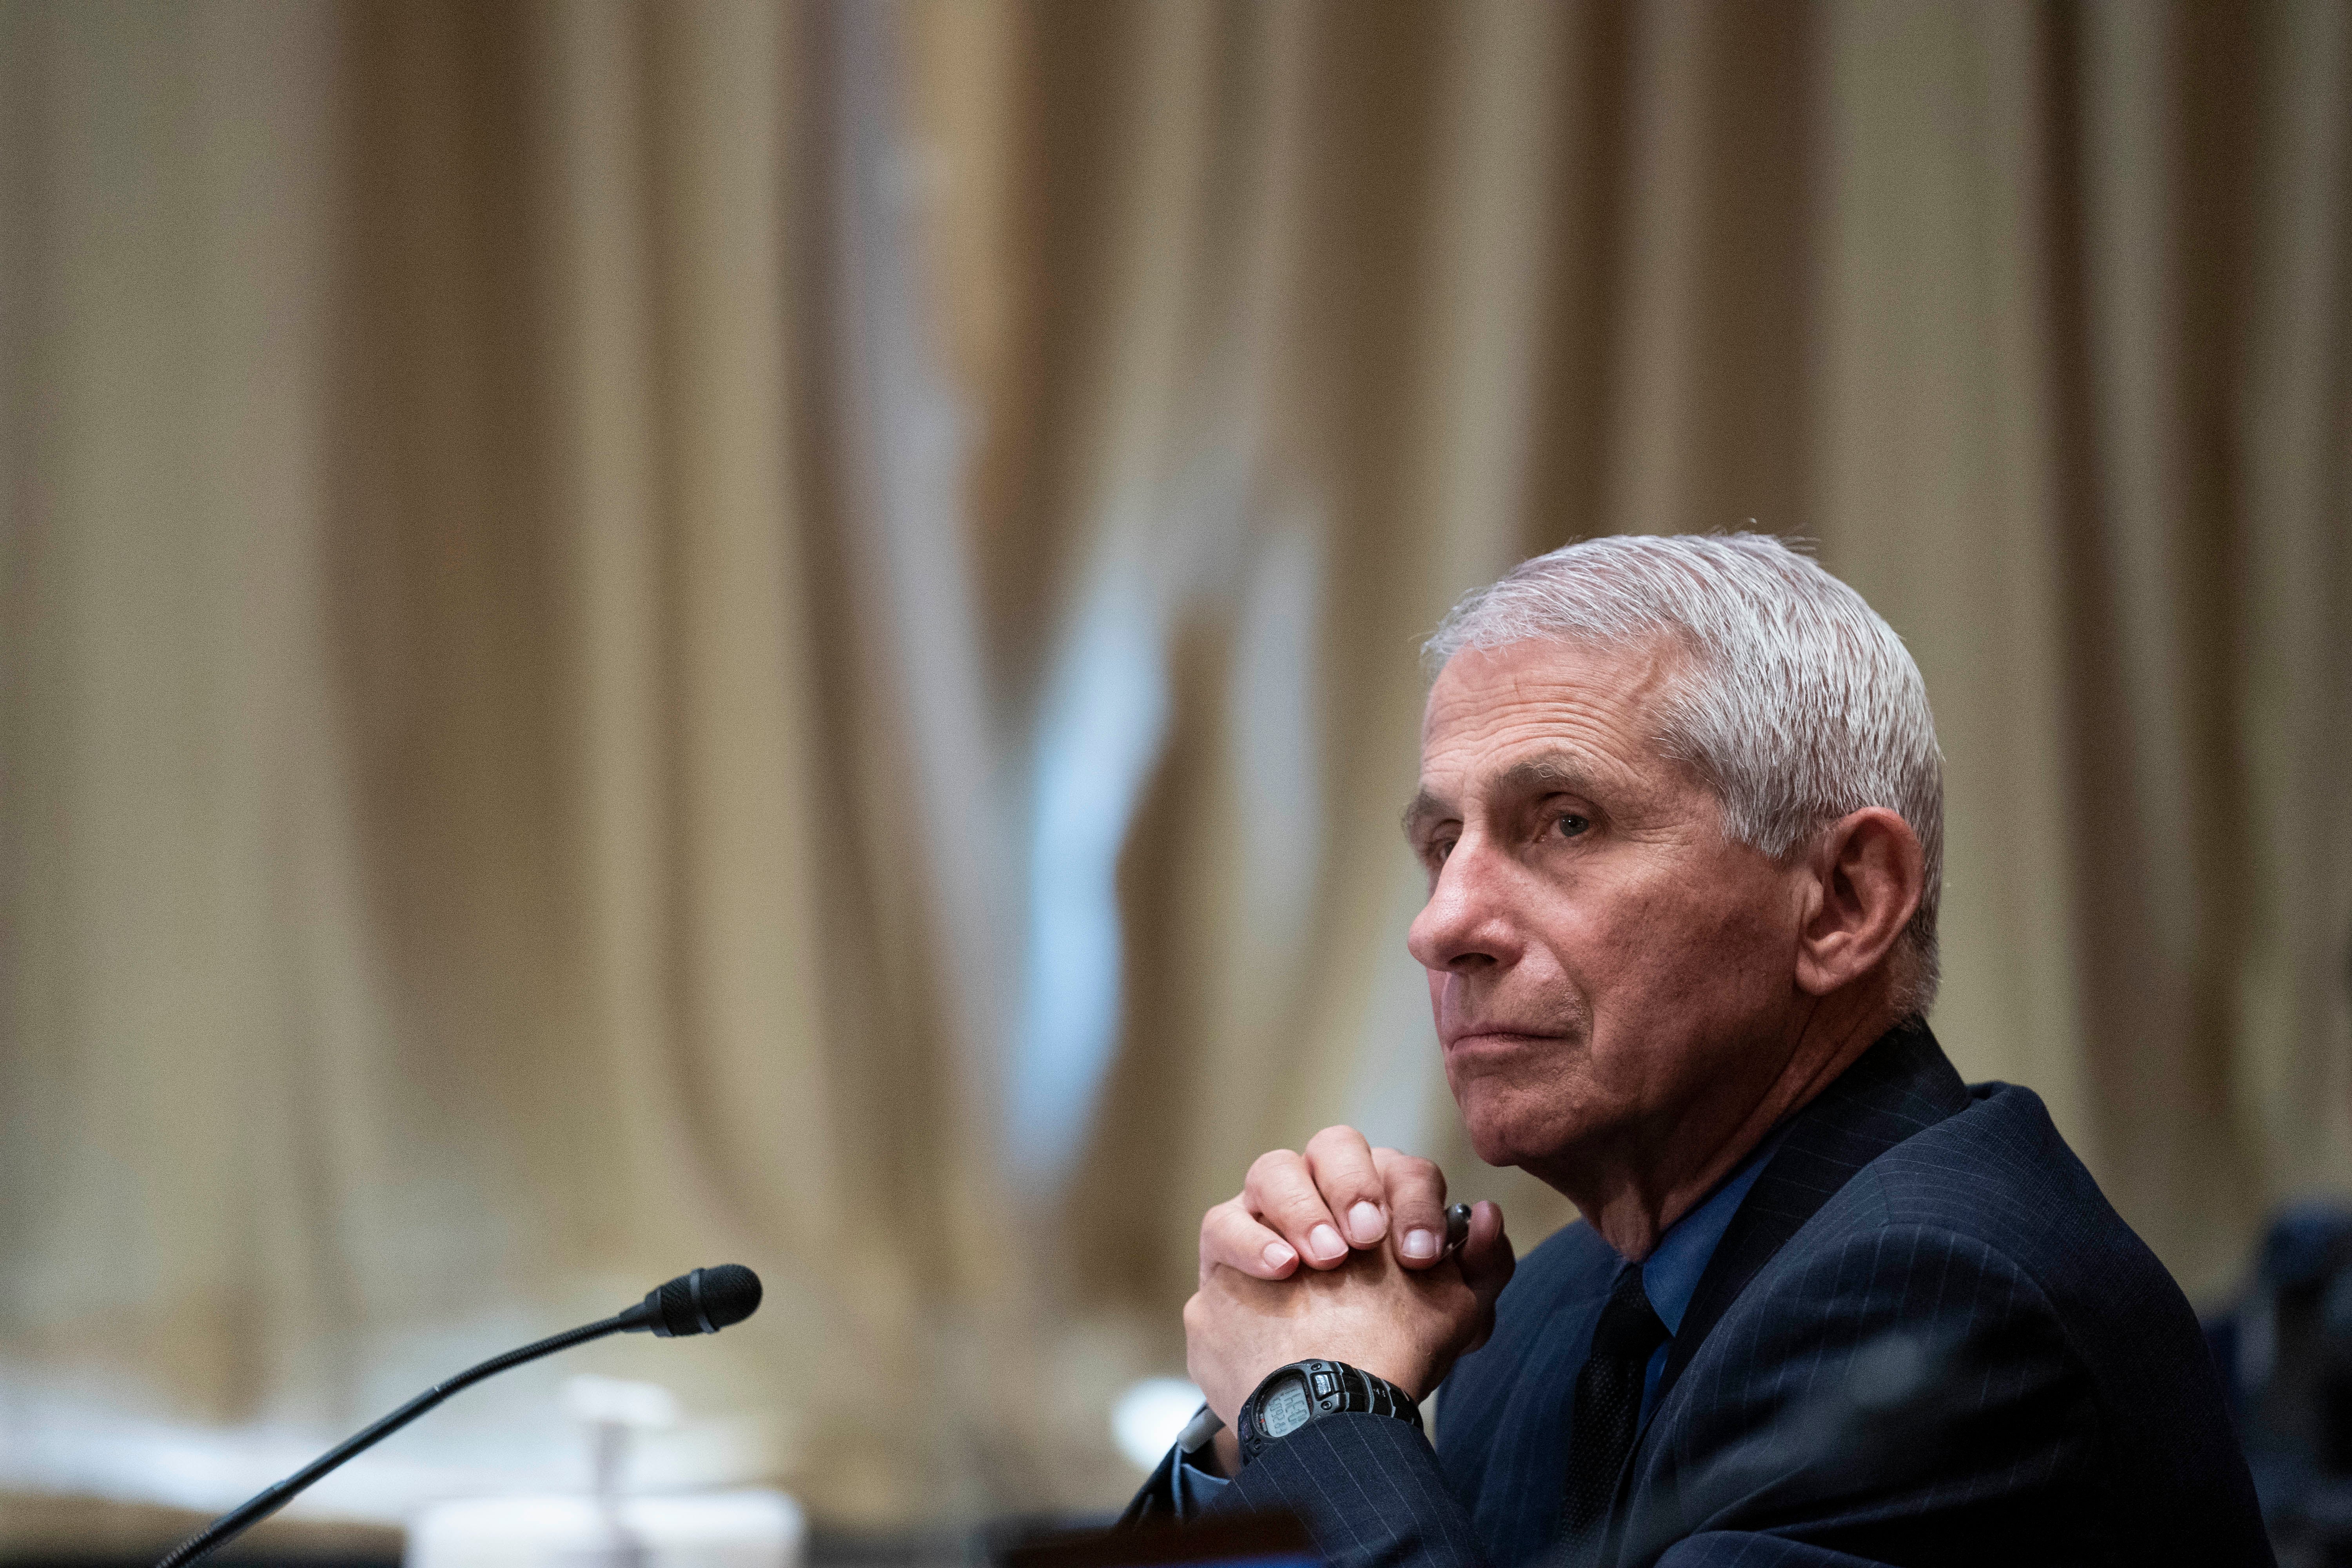 File Image: Dr Anthony Fauci, director of the National Institute of Allergy and Infectious Diseases, listens during a Senate Appropriations Labor, Health and Human Services Subcommittee hearing looking into the budget estimates for National Institute of Health (NIH) and state of medical research on Capitol Hill, 26 May 2021 in Washington, DC